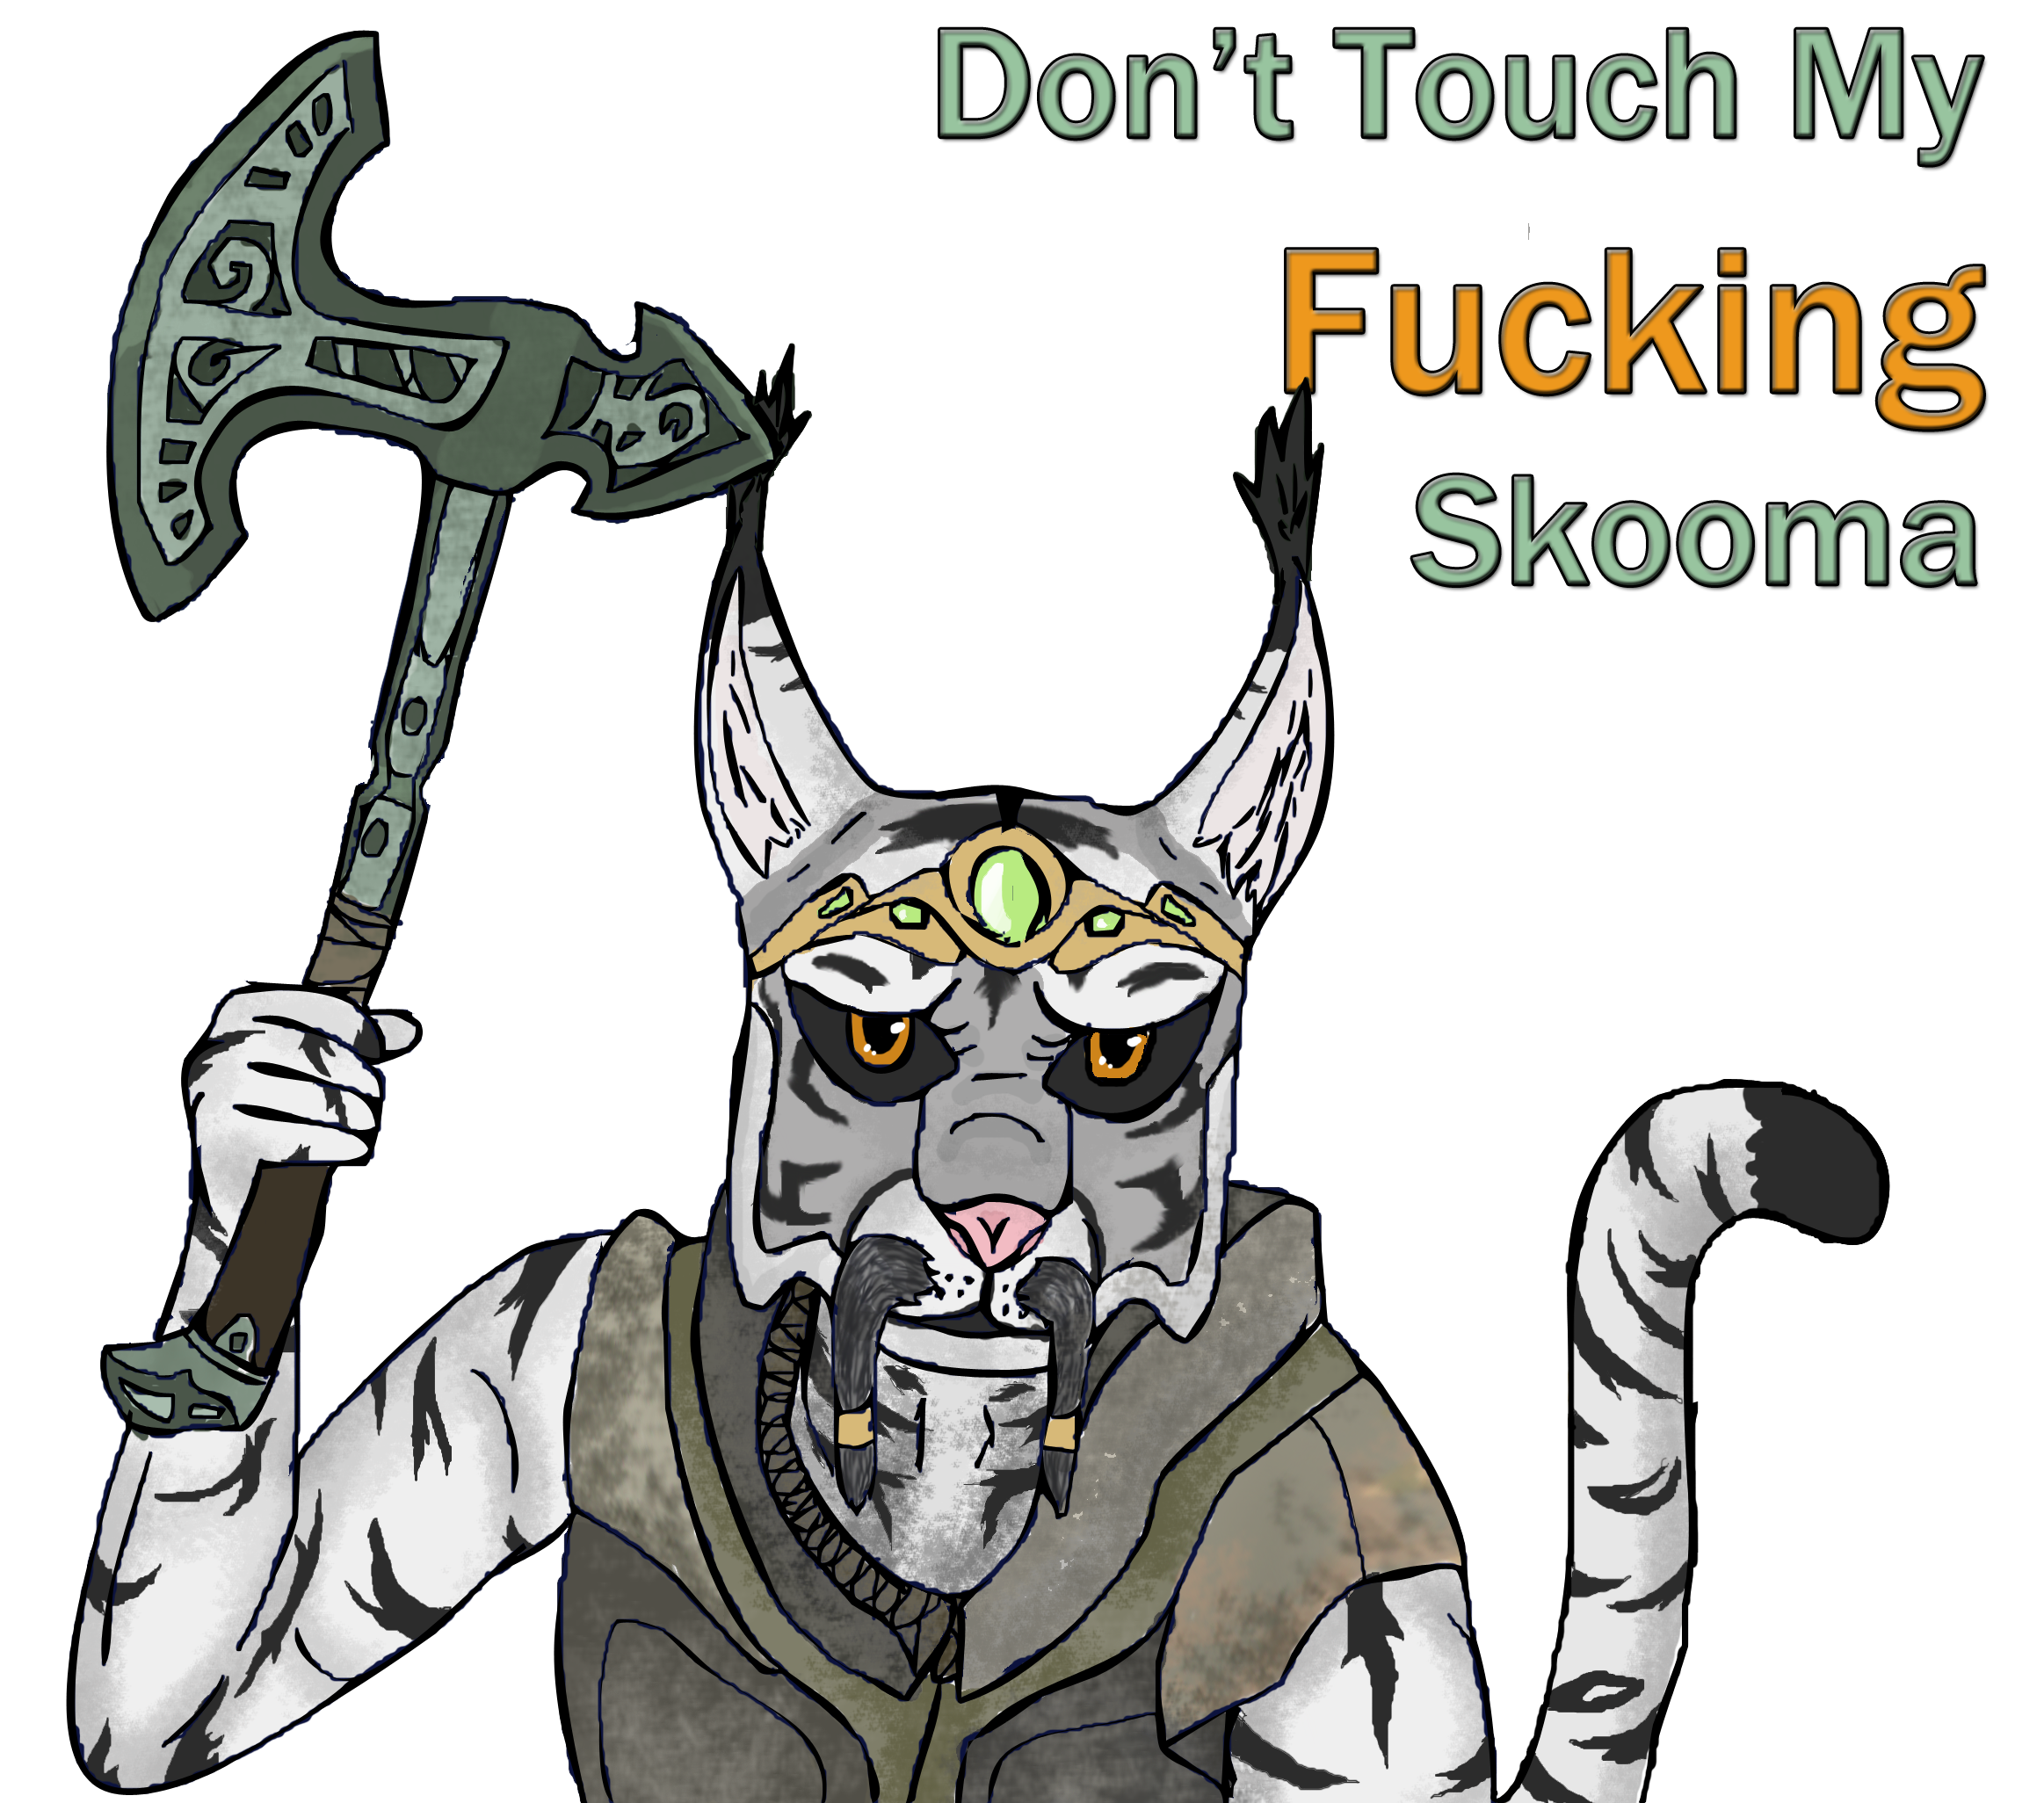 skooma_by_xxastronomyxx-d4hgqgg.png